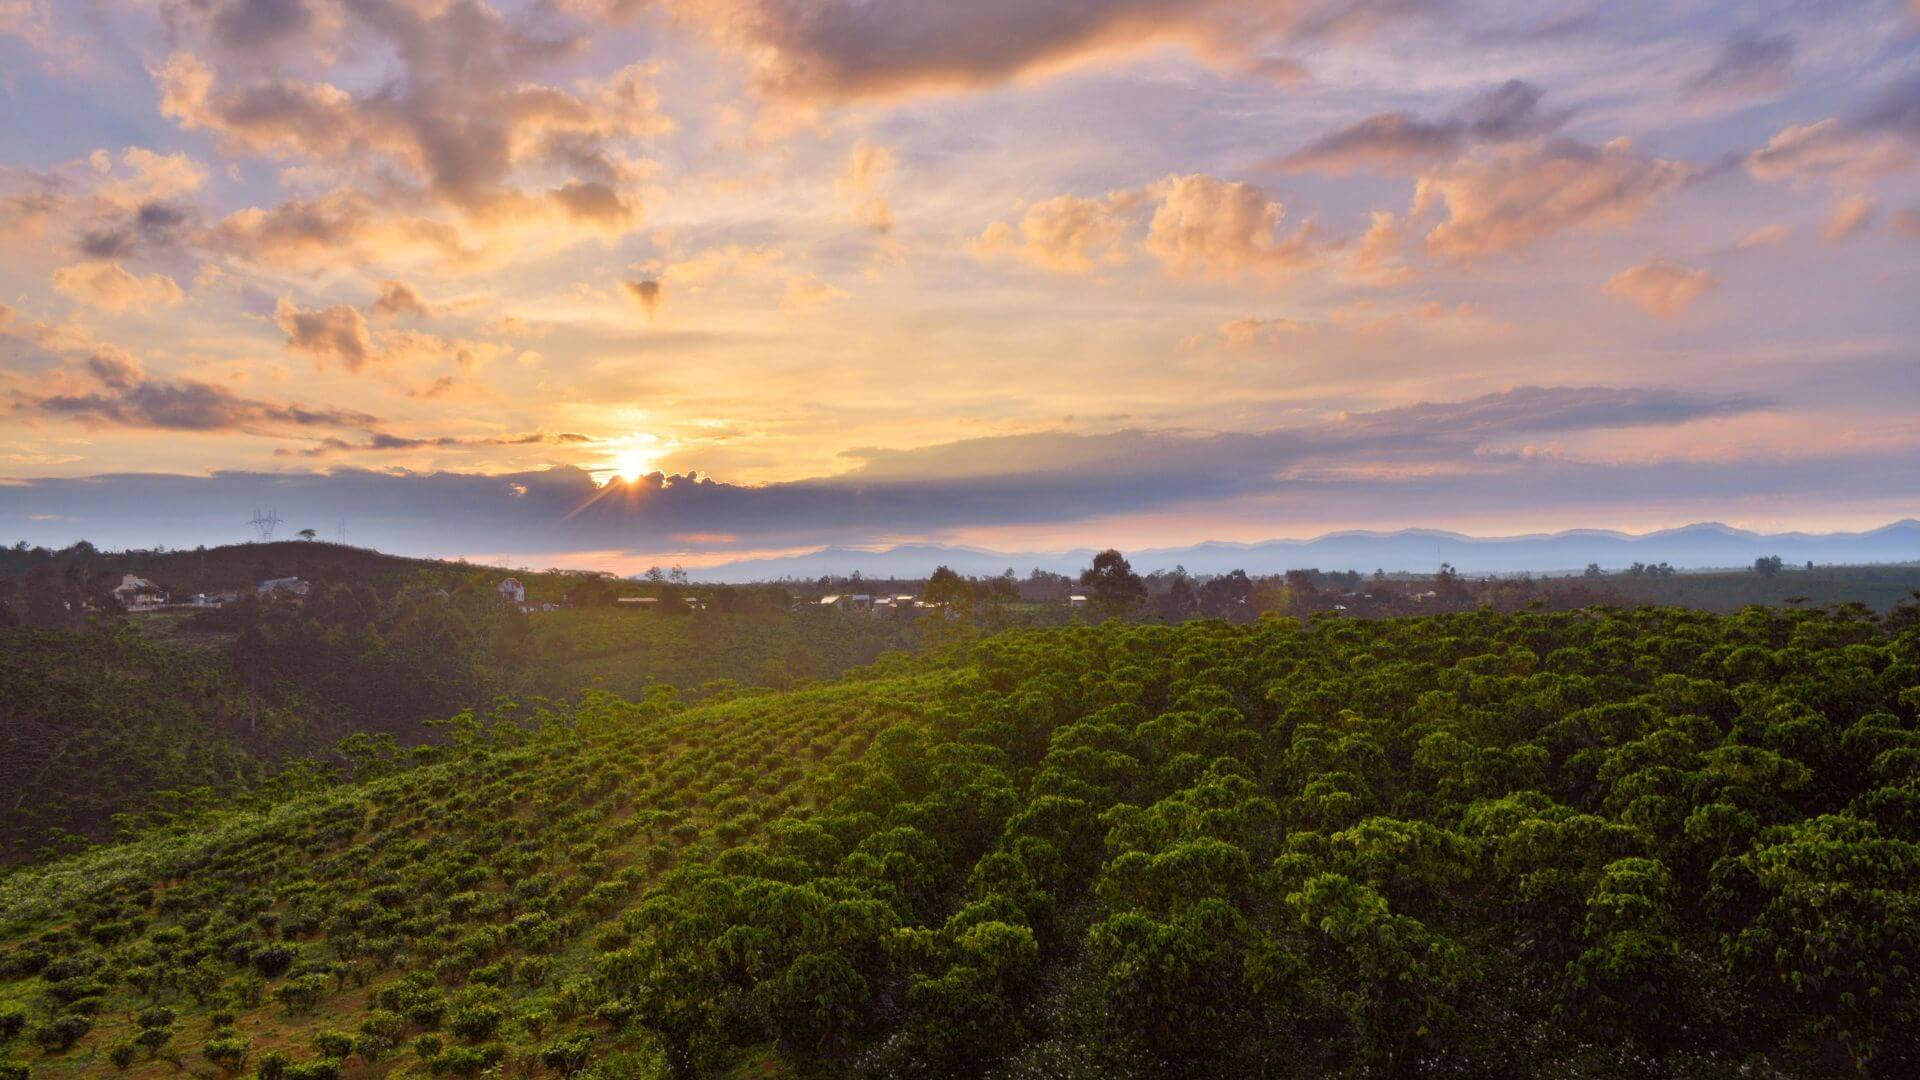 International Coffee Farms - A Potential Investment?